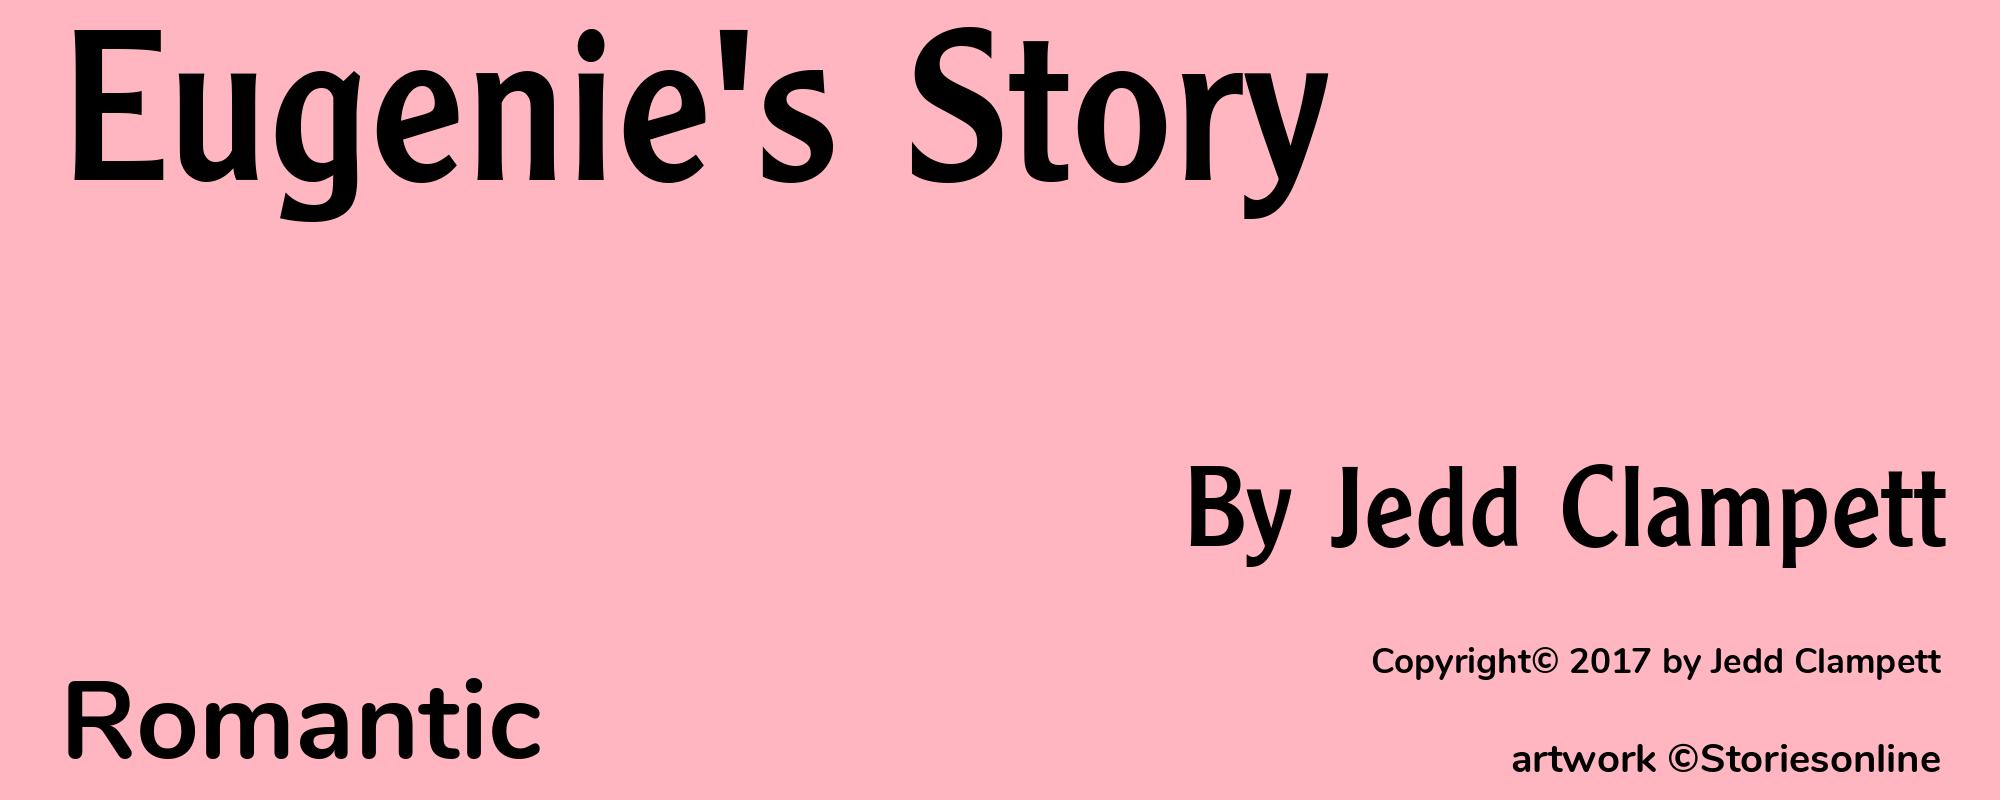 Eugenie's Story - Cover